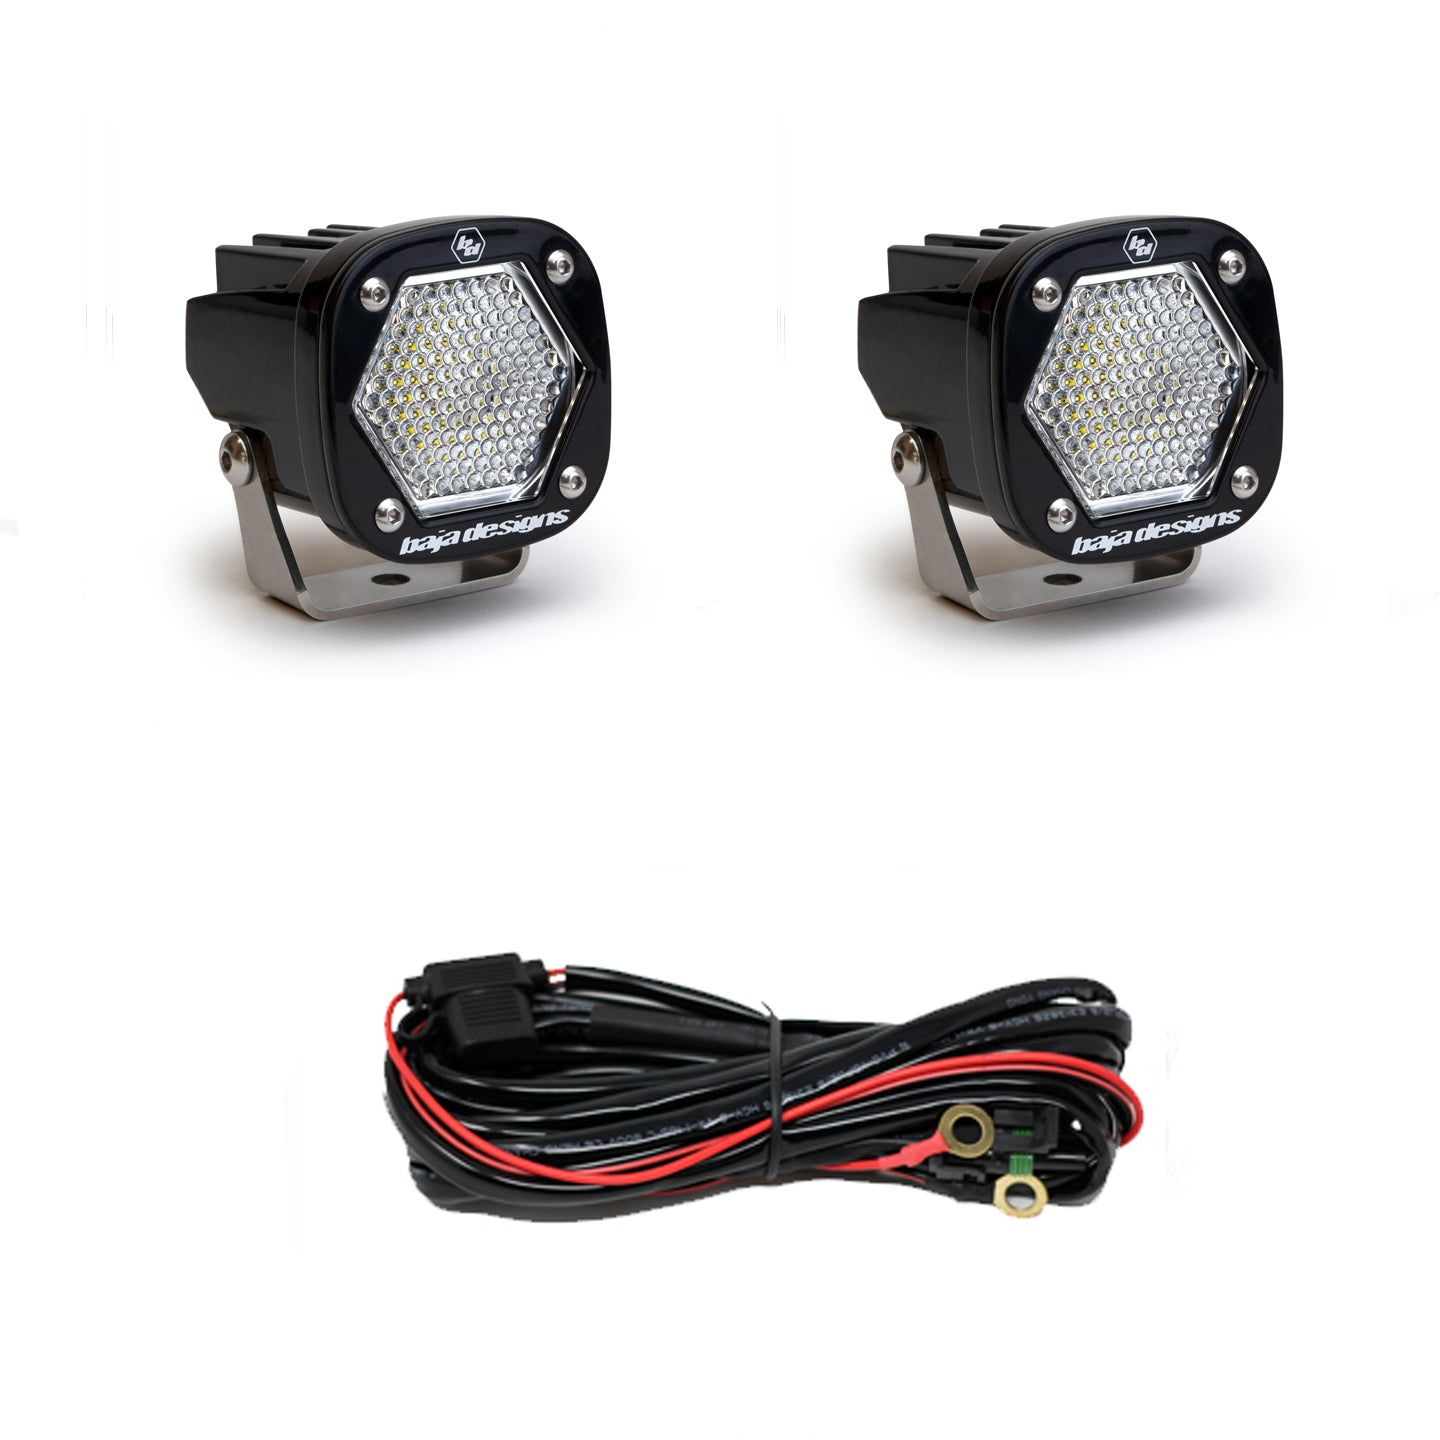 Baja Designs S1 LED Lights (Sold in Pairs)